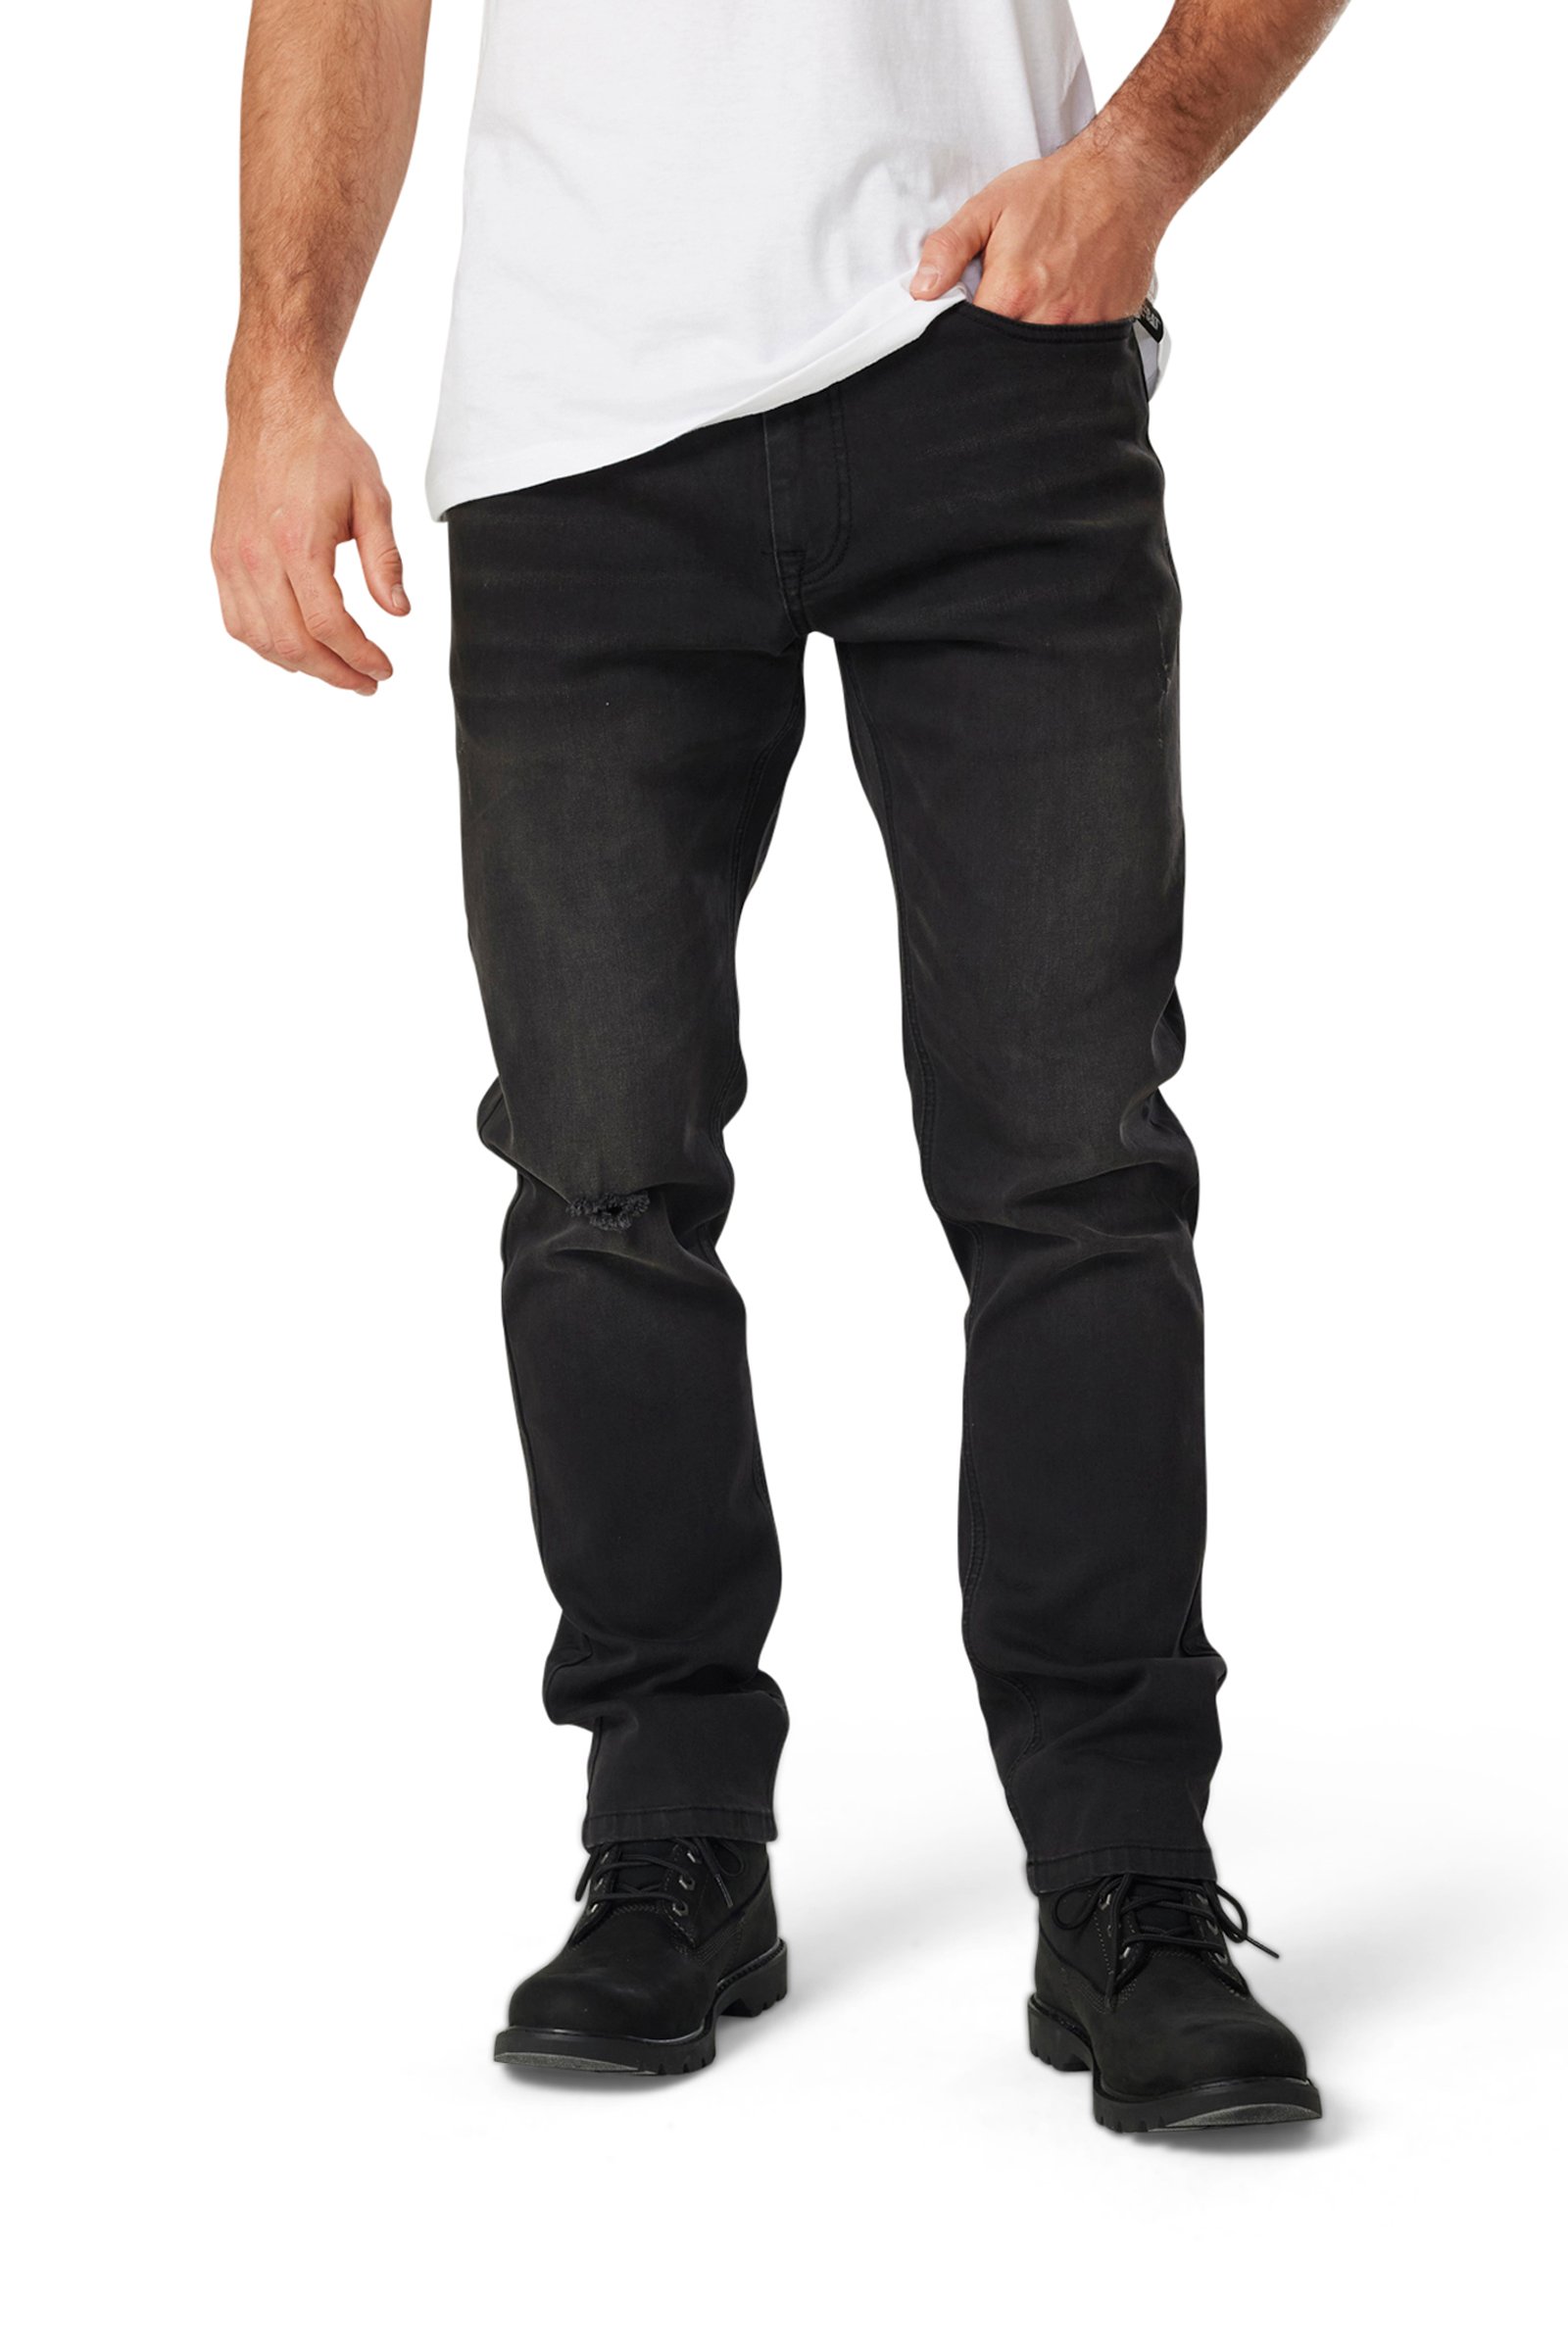 Casual Pants for Men, Casual Shorts